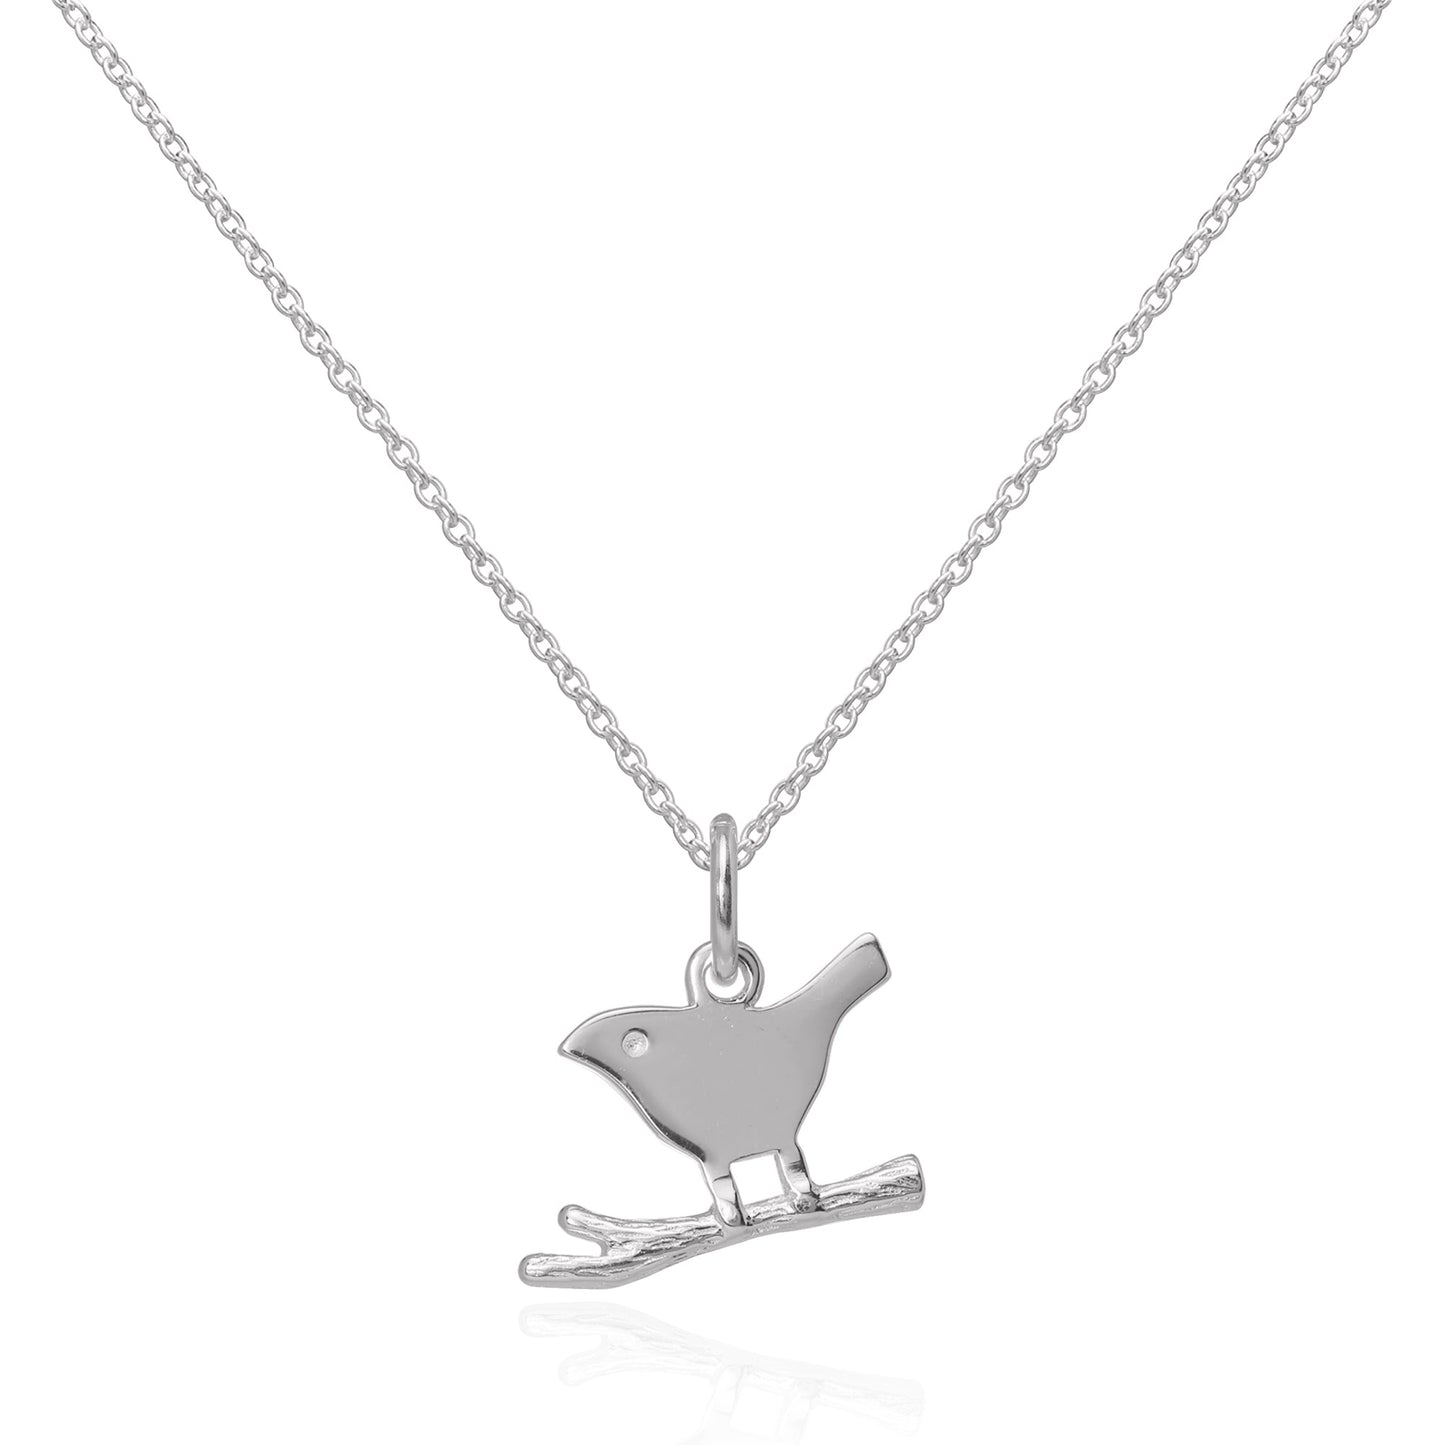 Sterling Silver Simple Bird on a Branch Pendant Necklace 16 - 22 Inches